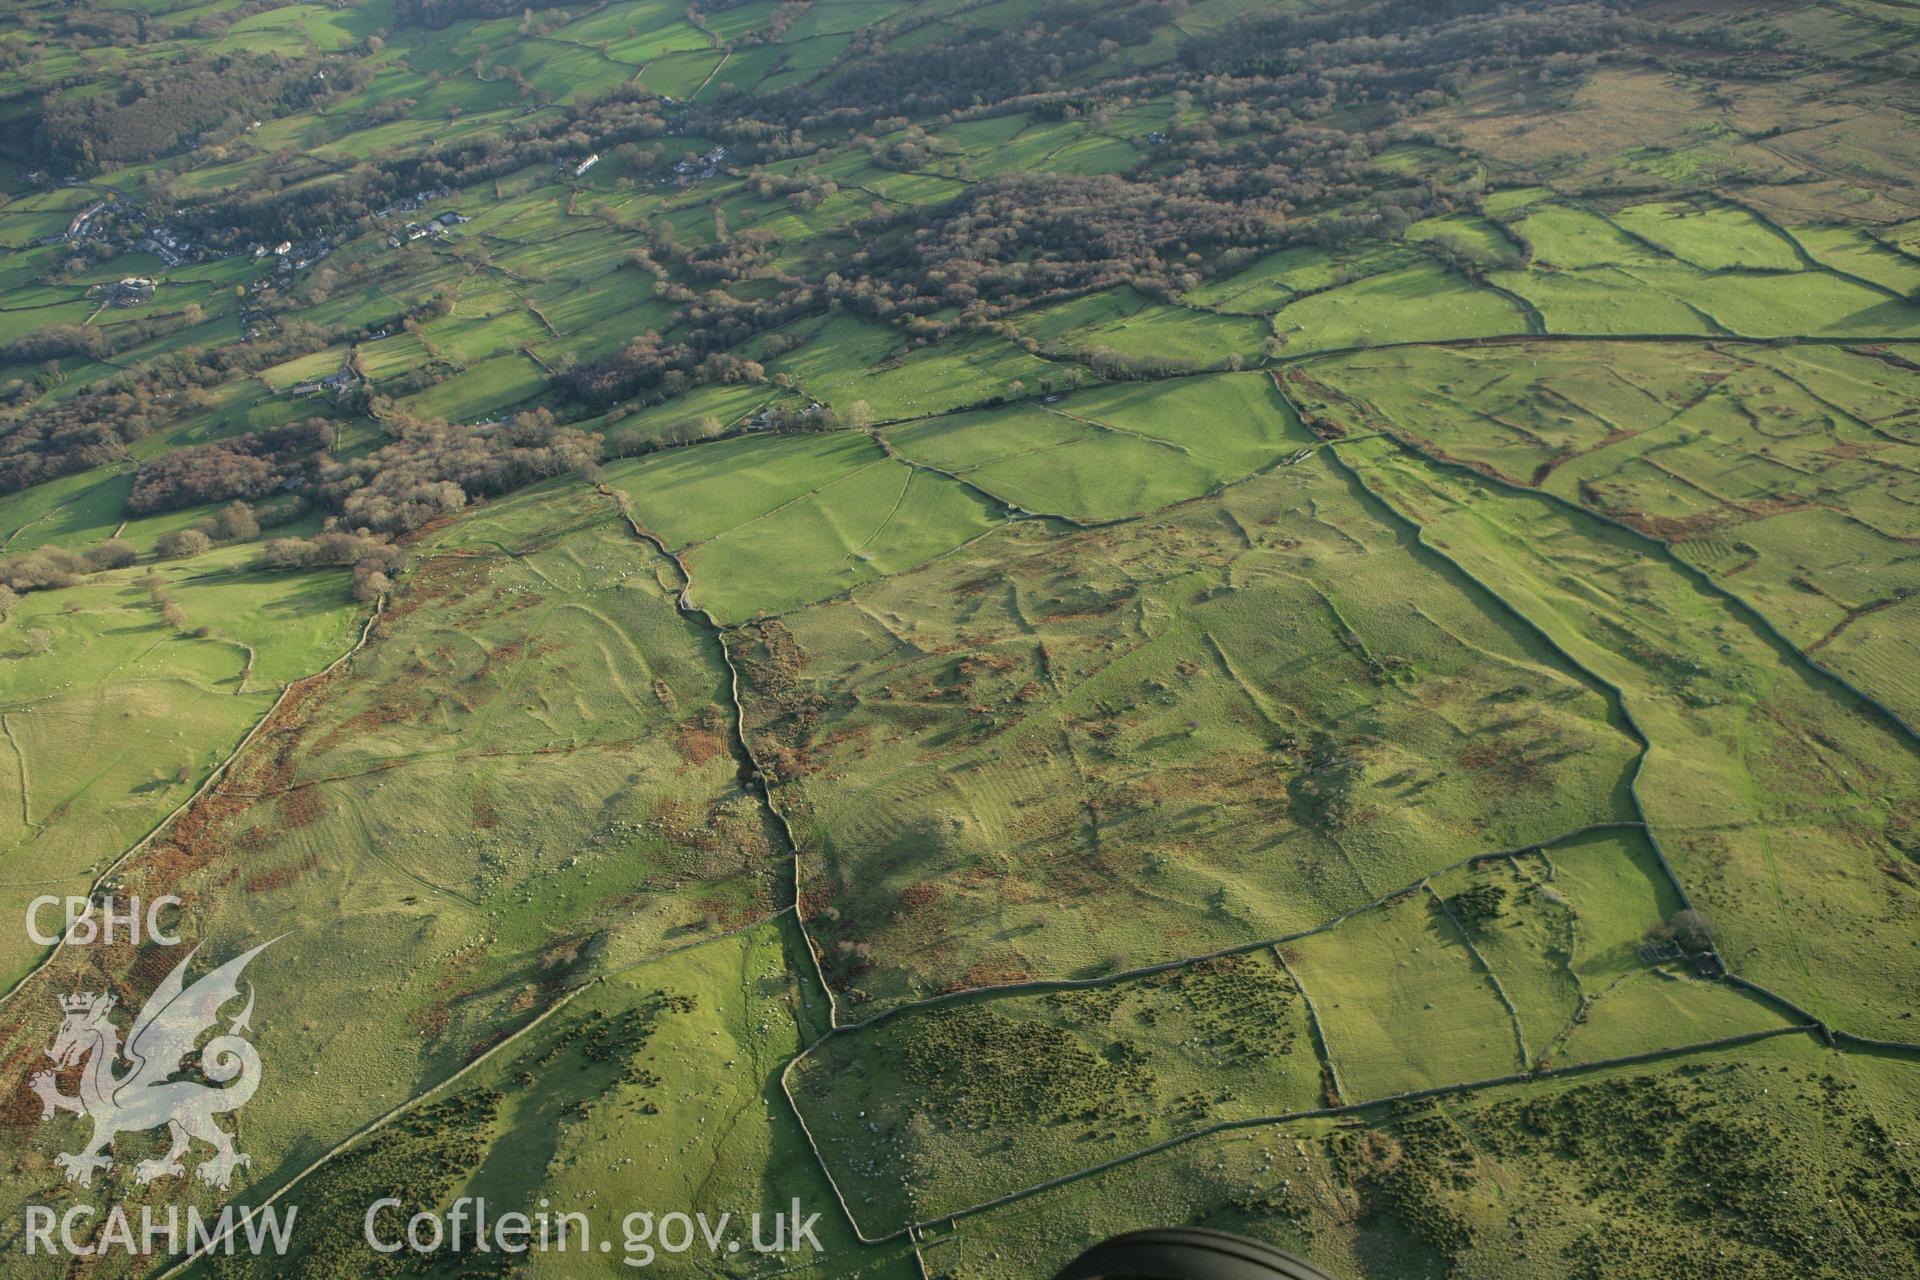 RCAHMW colour oblique aerial photograph of Maen-y-Bardd Settlement and field systems. Taken on 10 December 2009 by Toby Driver